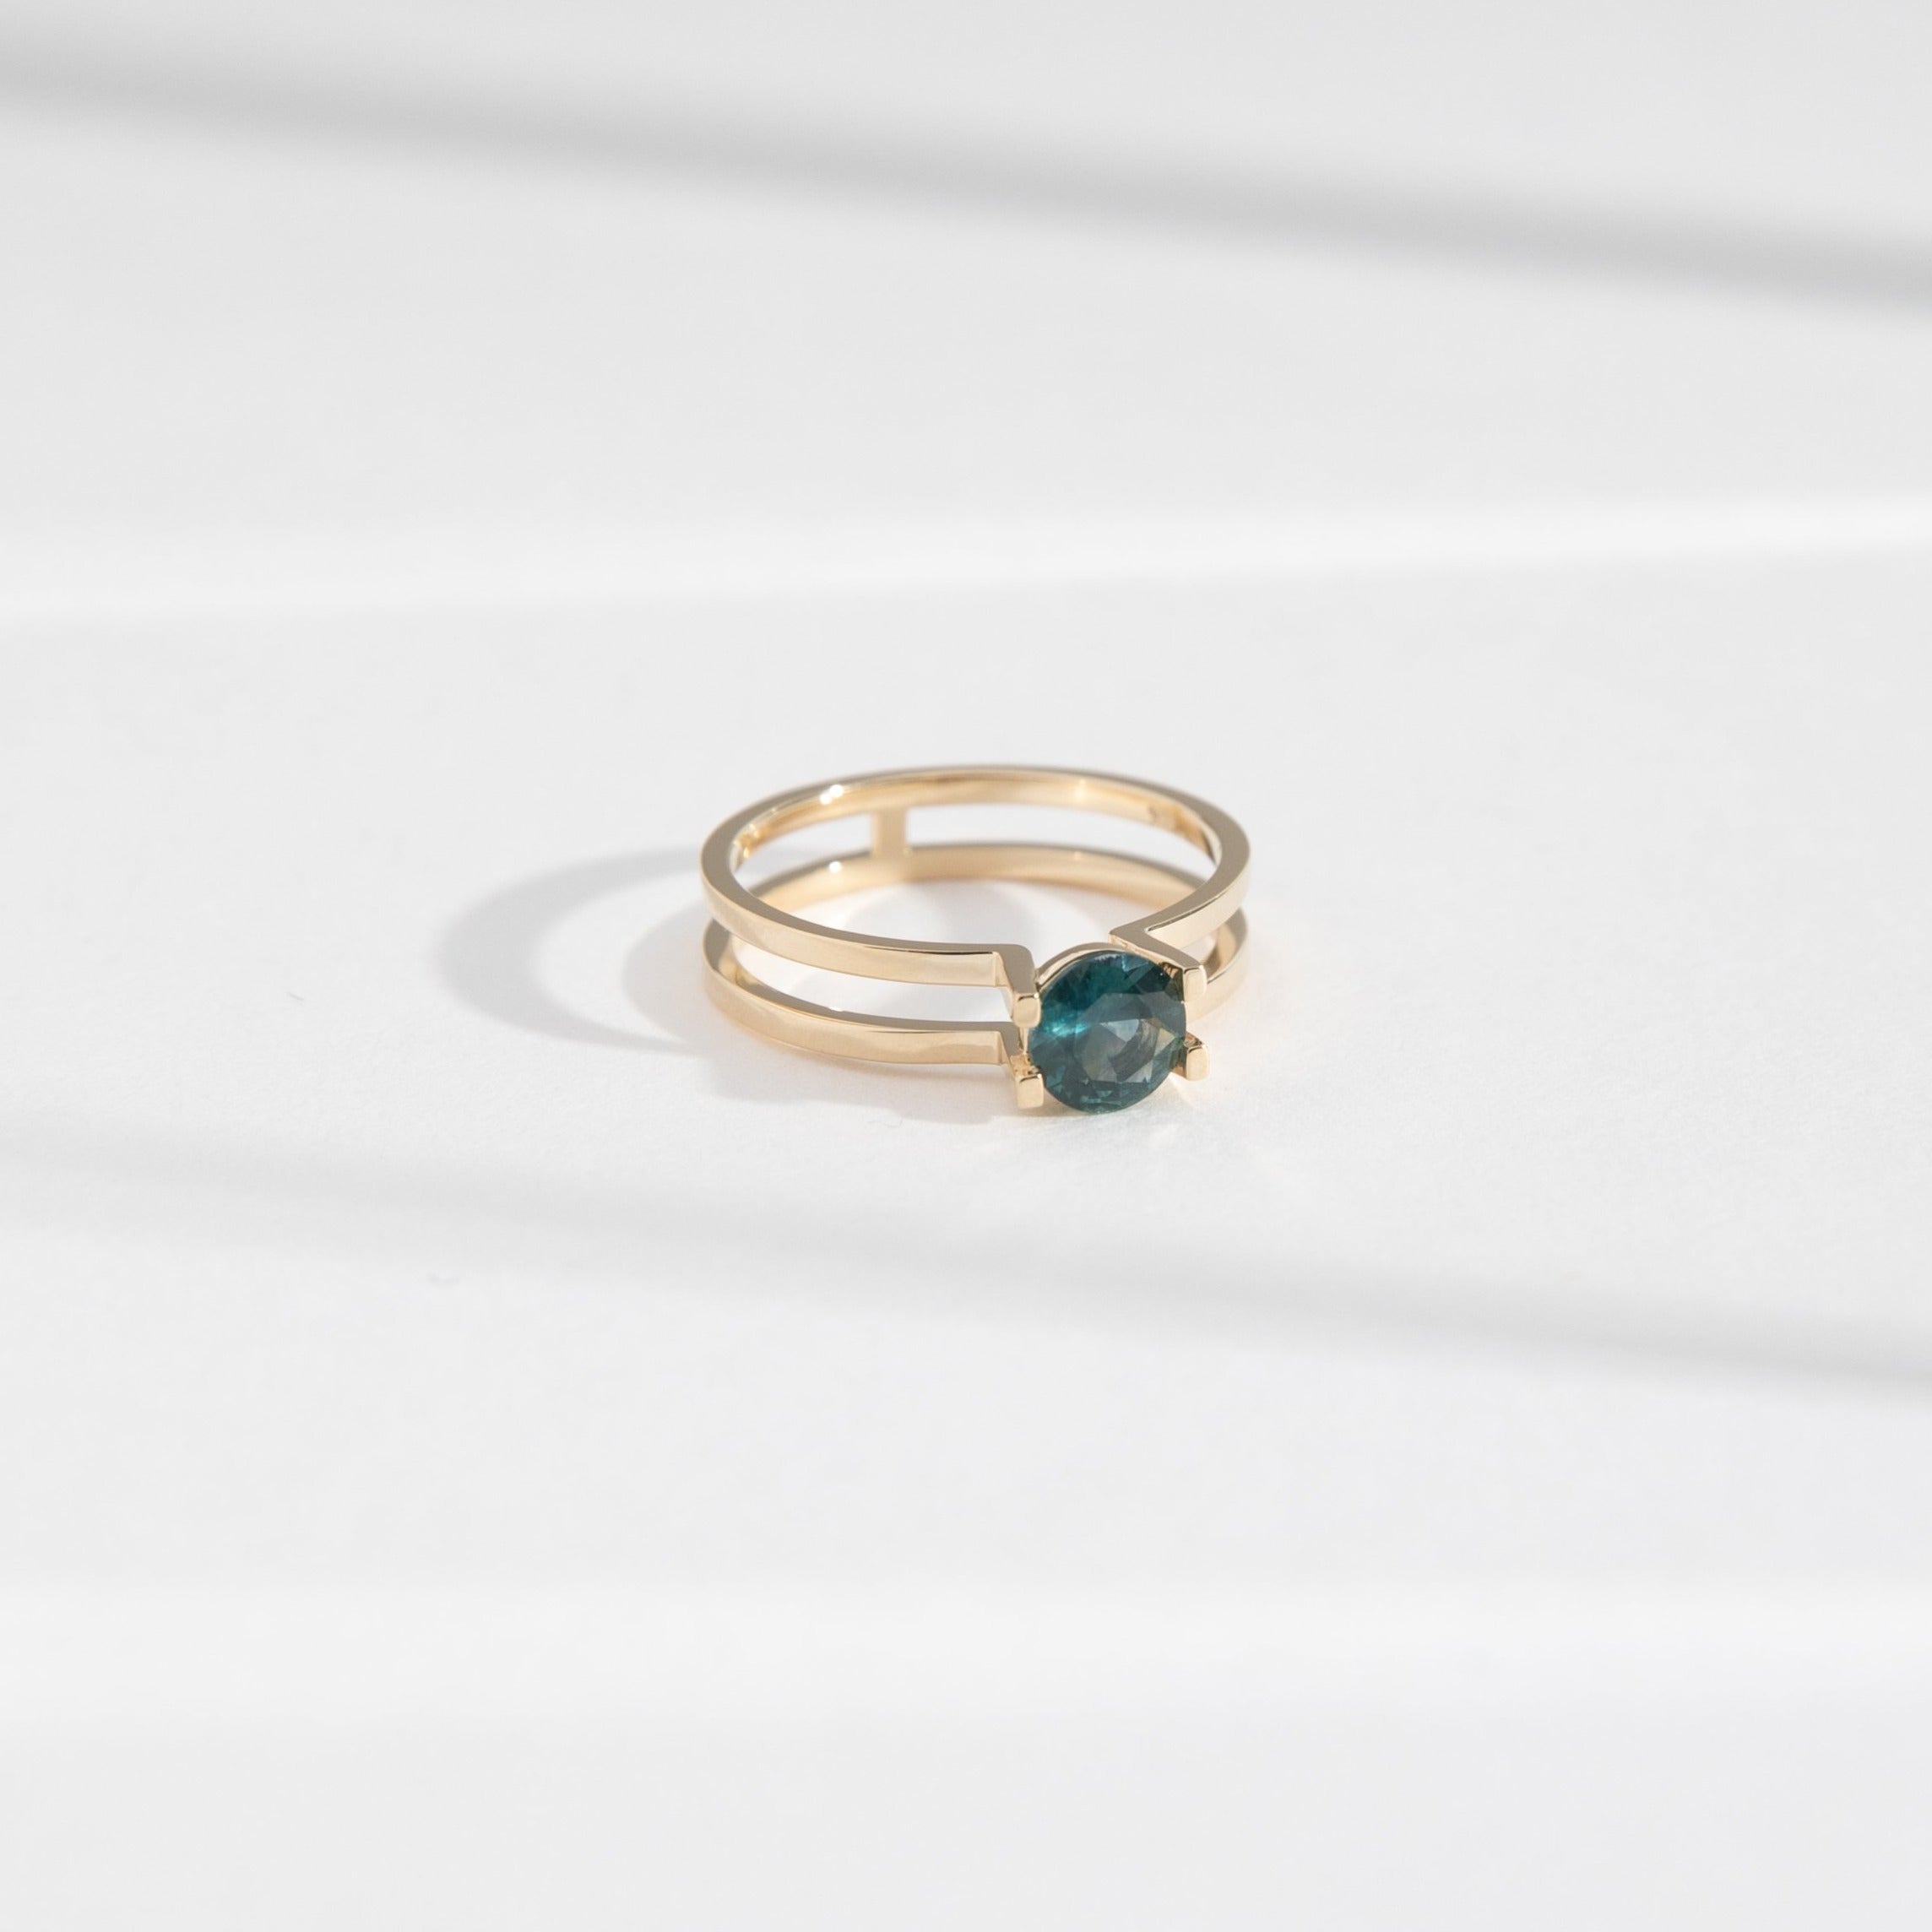 Cara Handmade Ring in 14k Gold set with a 0.68ct dark teal round brilliant cut sapphire By SHW Fine Jewelry NYC